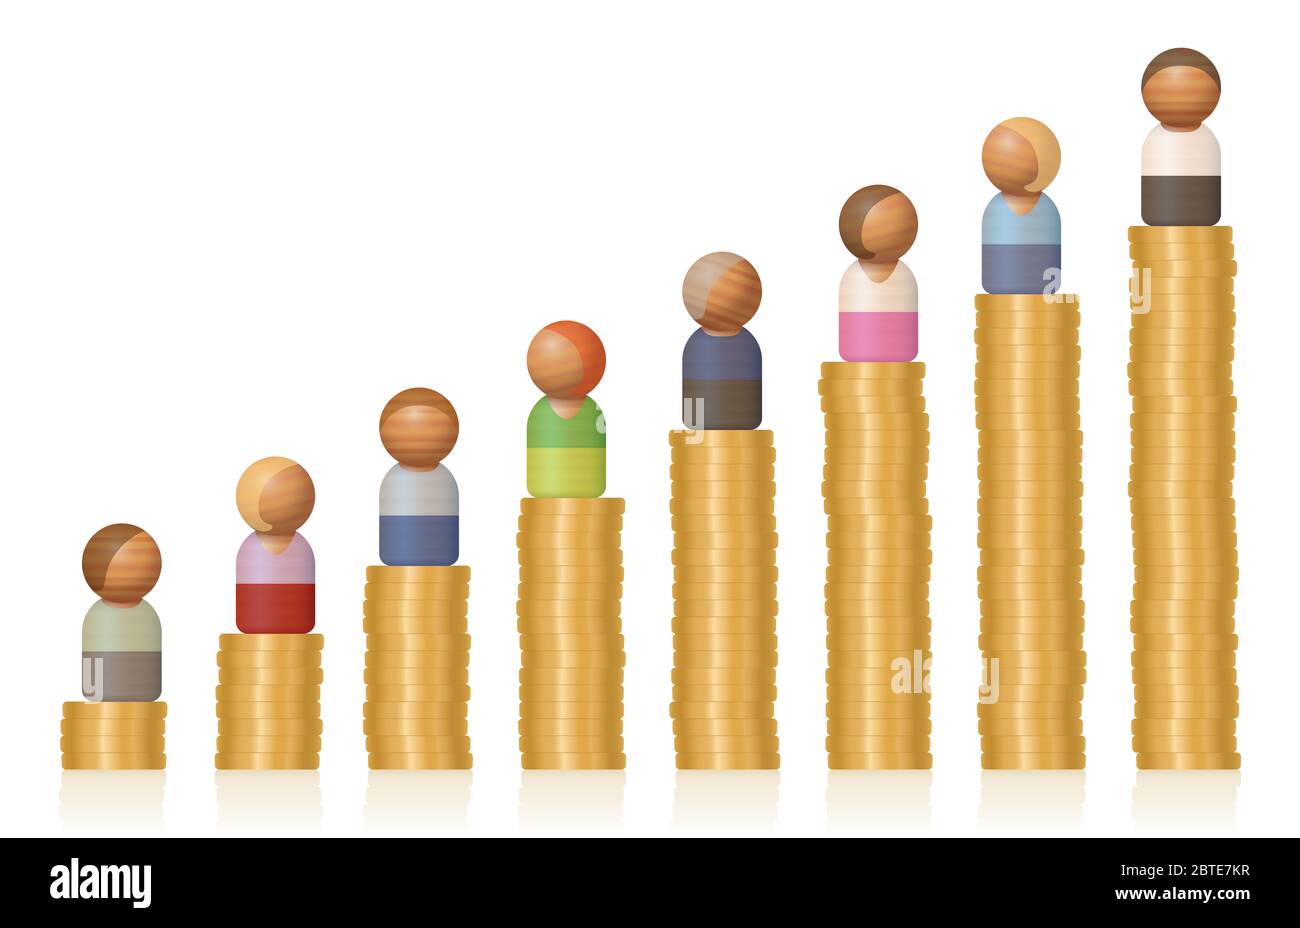 Increasing income, growing success, enhancing business, career and wealth - symbolized with toy figures on rising money towers. Stock Photo